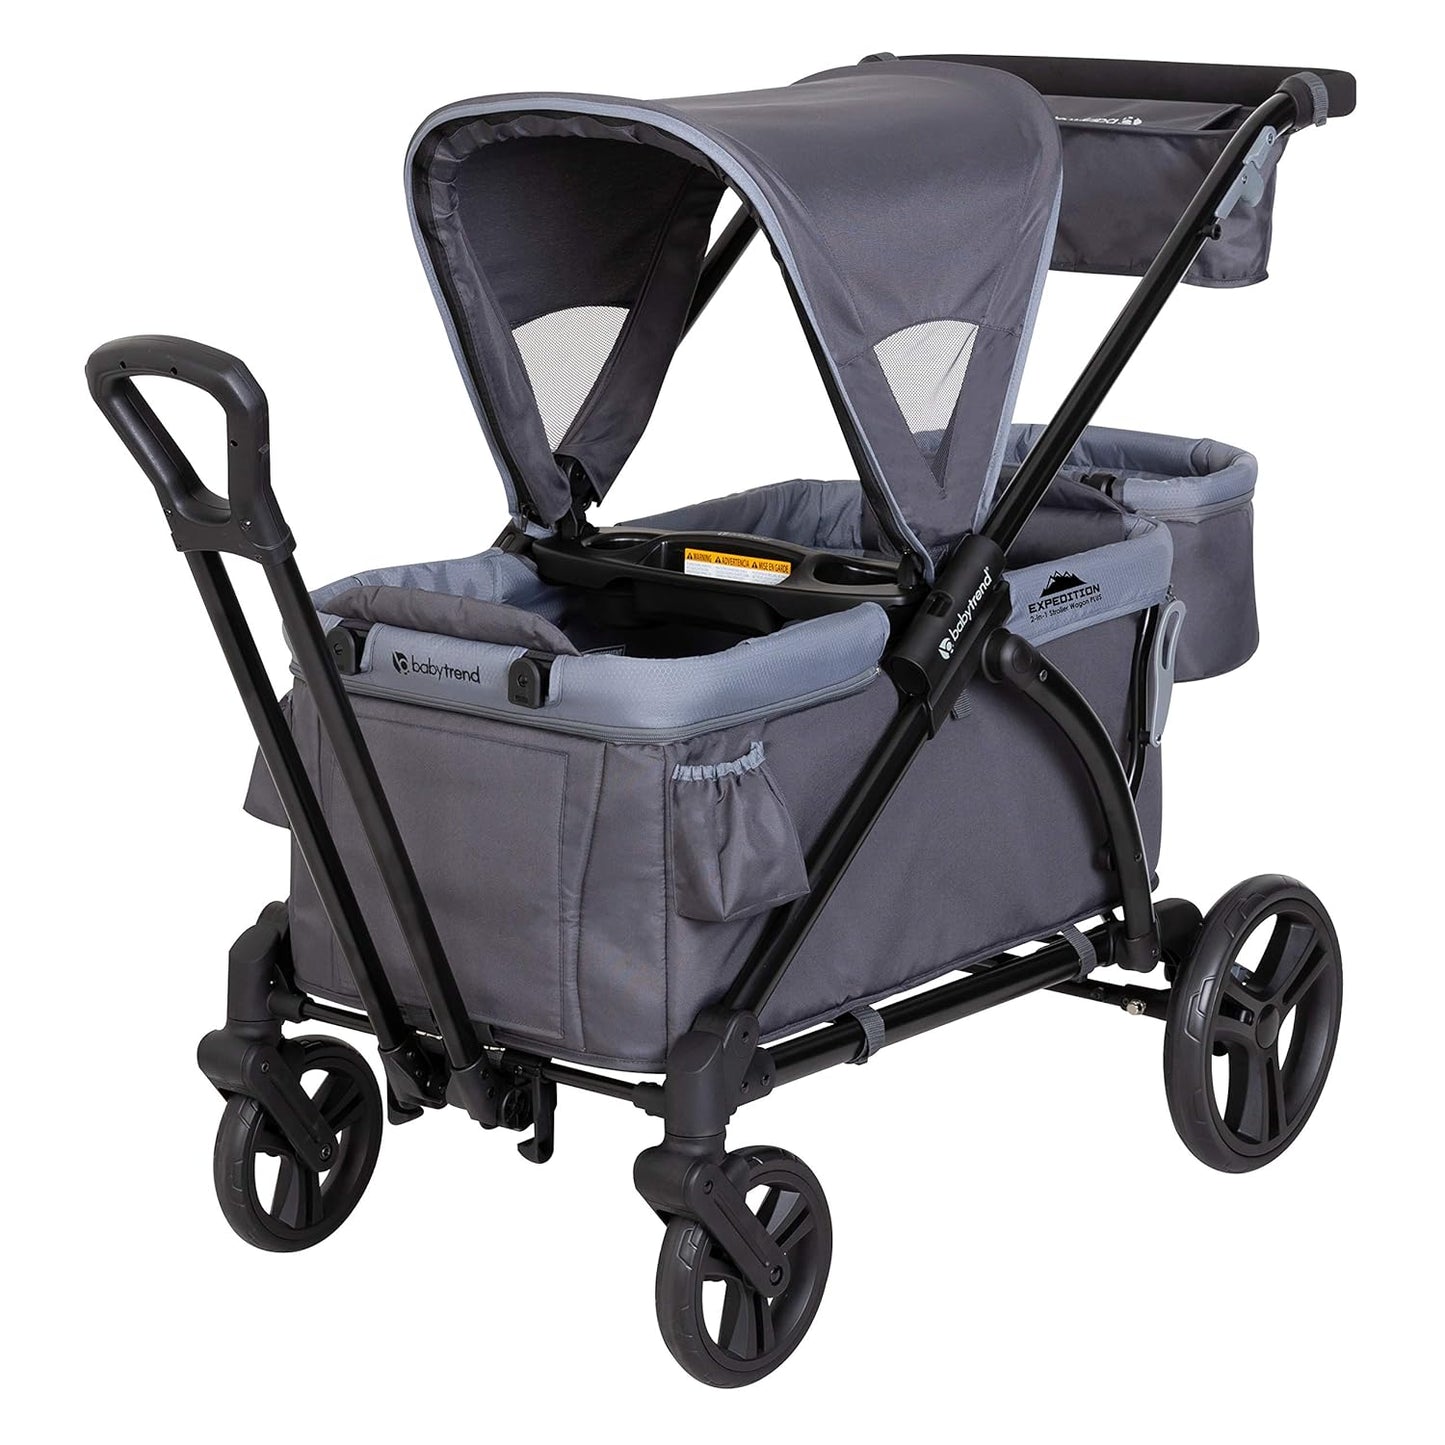 Baby Trend Expedition Stroller Wagon, Liberty Midnight